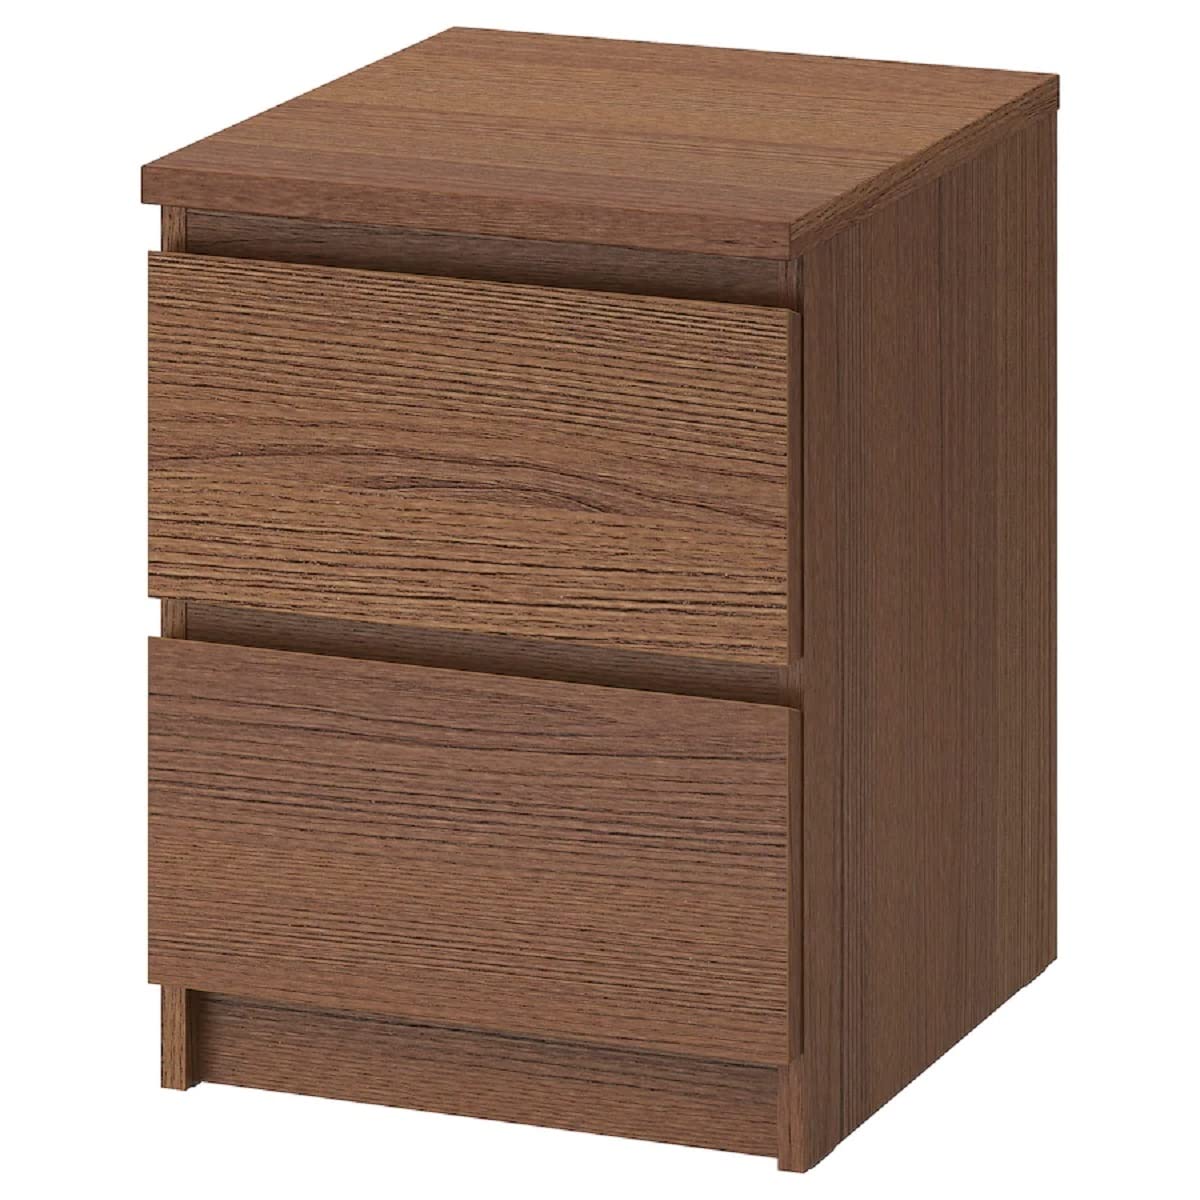 MALM Chest of 2 drawers, brown, 40x55 cm